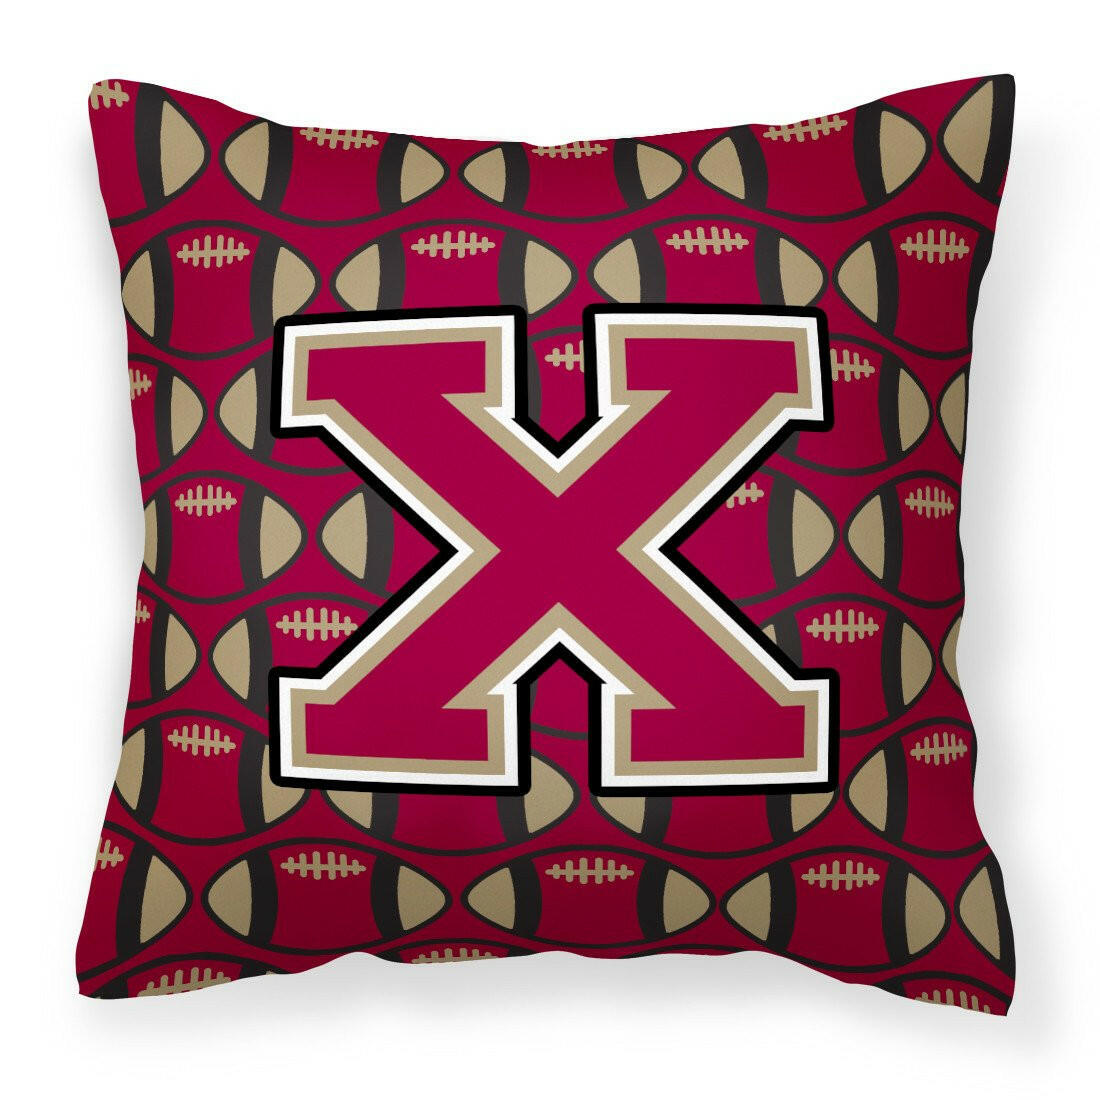 Letter X Football Garnet and Gold Fabric Decorative Pillow CJ1078-XPW1414 by Caroline's Treasures